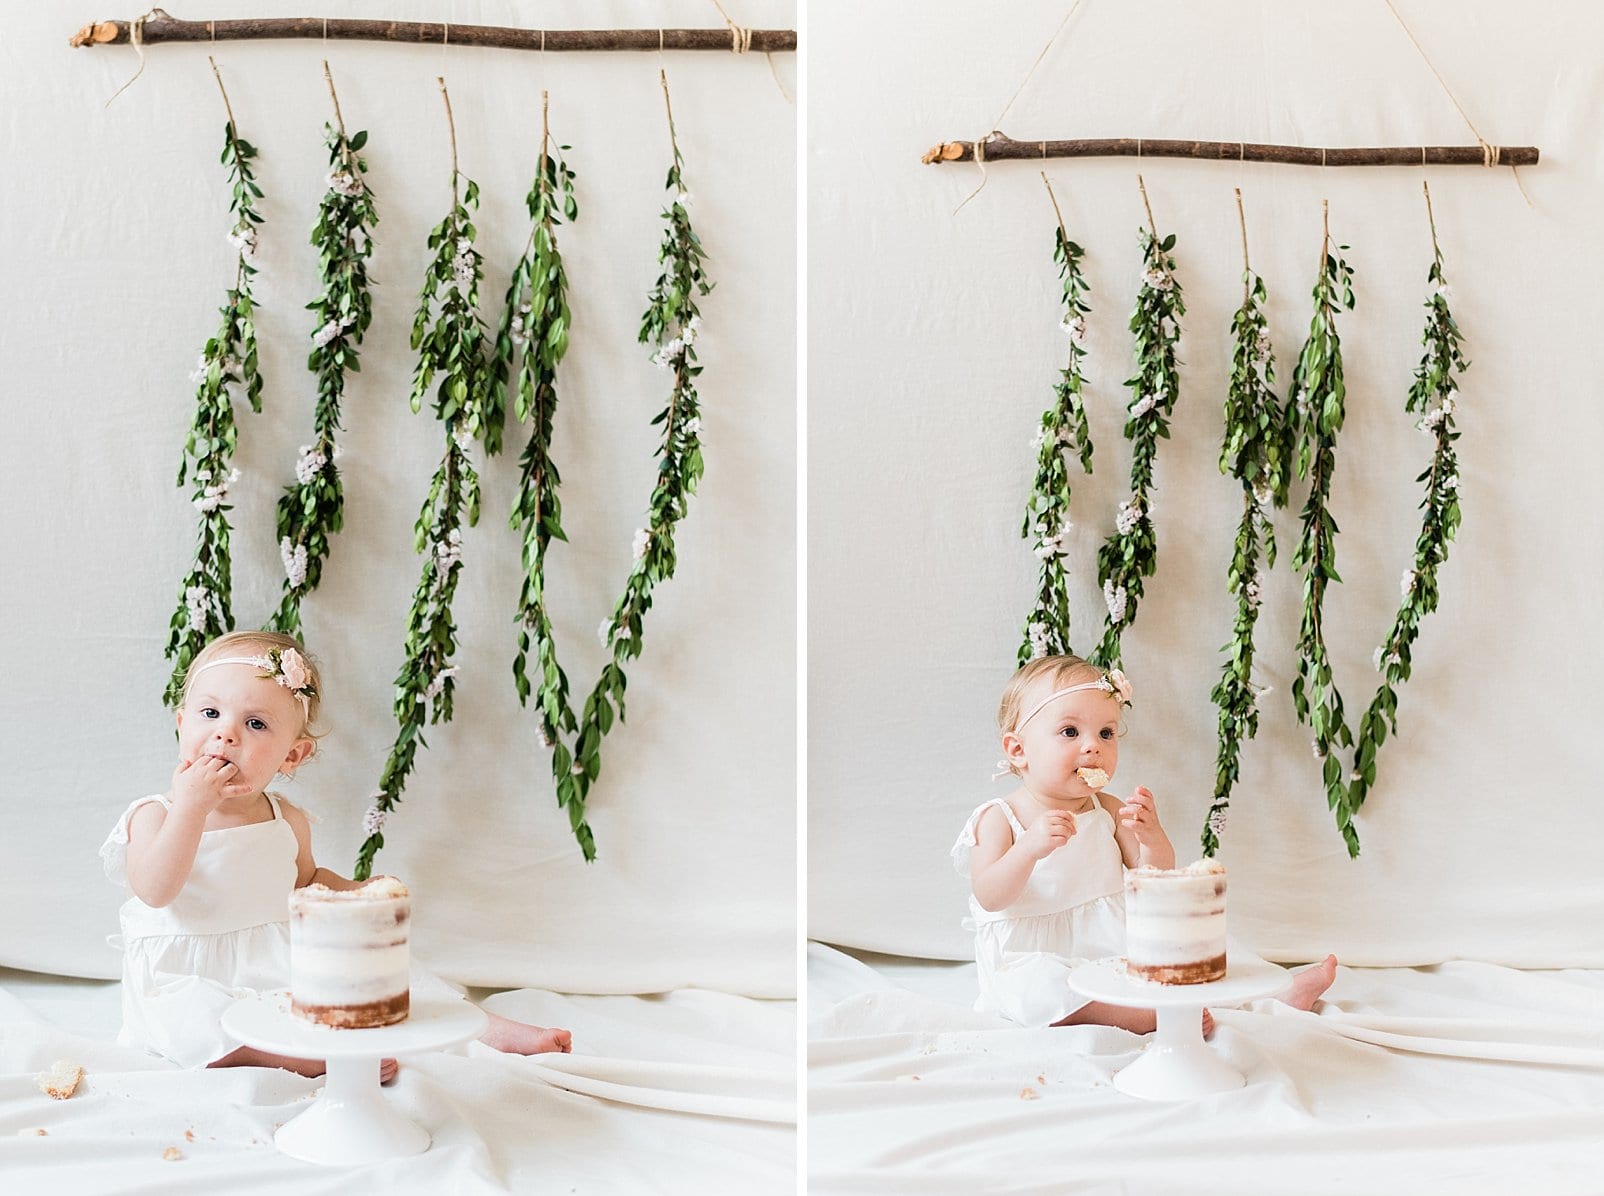 Wake Forest cake smash for 1st birthday party with greenery hanging from a stick as the back drop photo